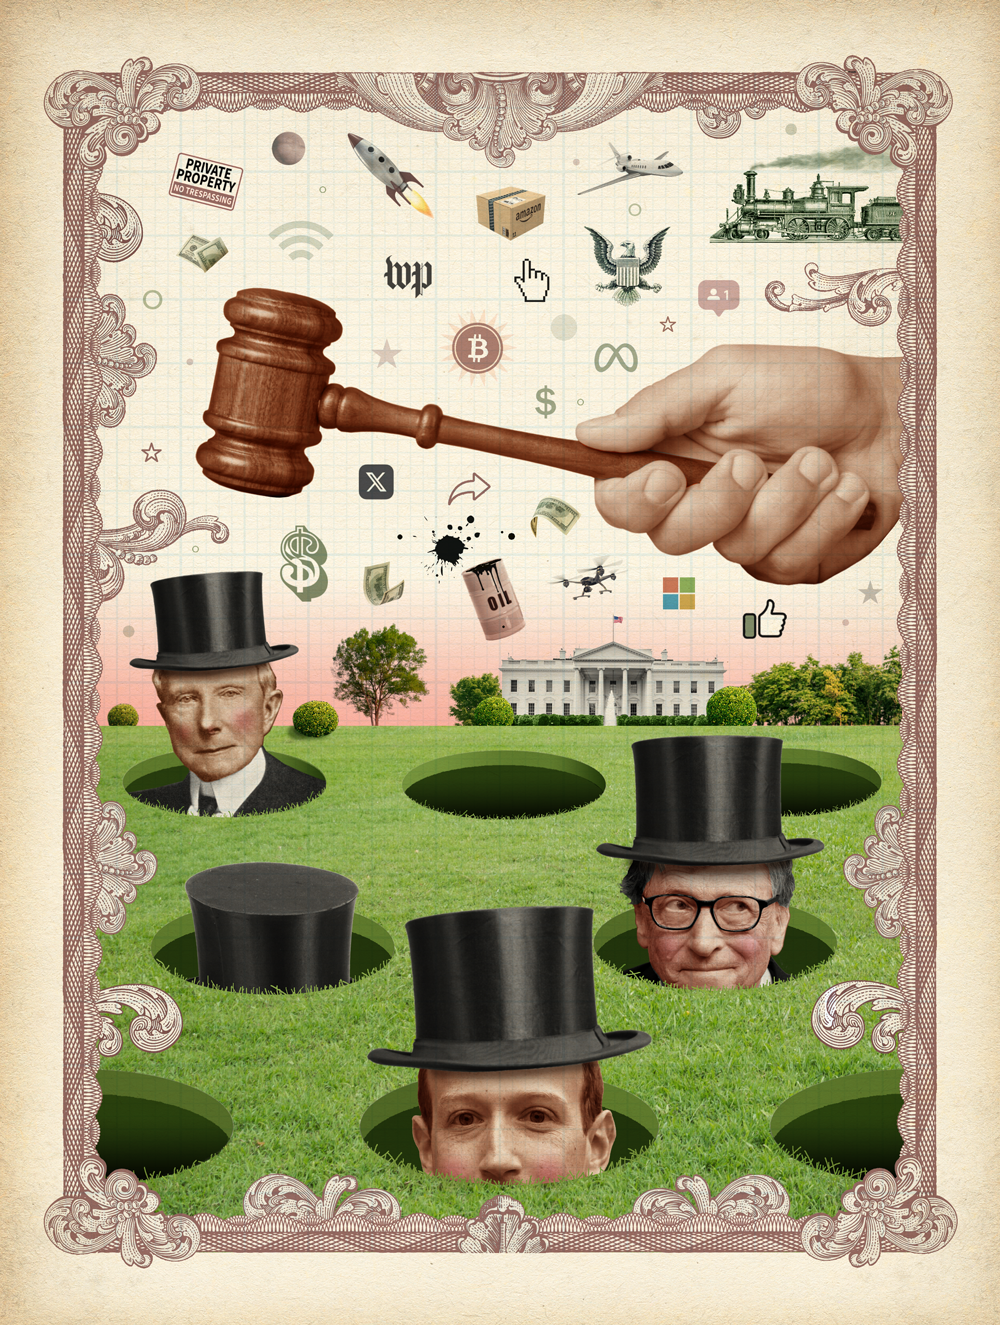 The game of Whac-A-Mole featuring historically wealthy figures John D. Rockefeller, Bill Gates and Mark Zuckerberg.